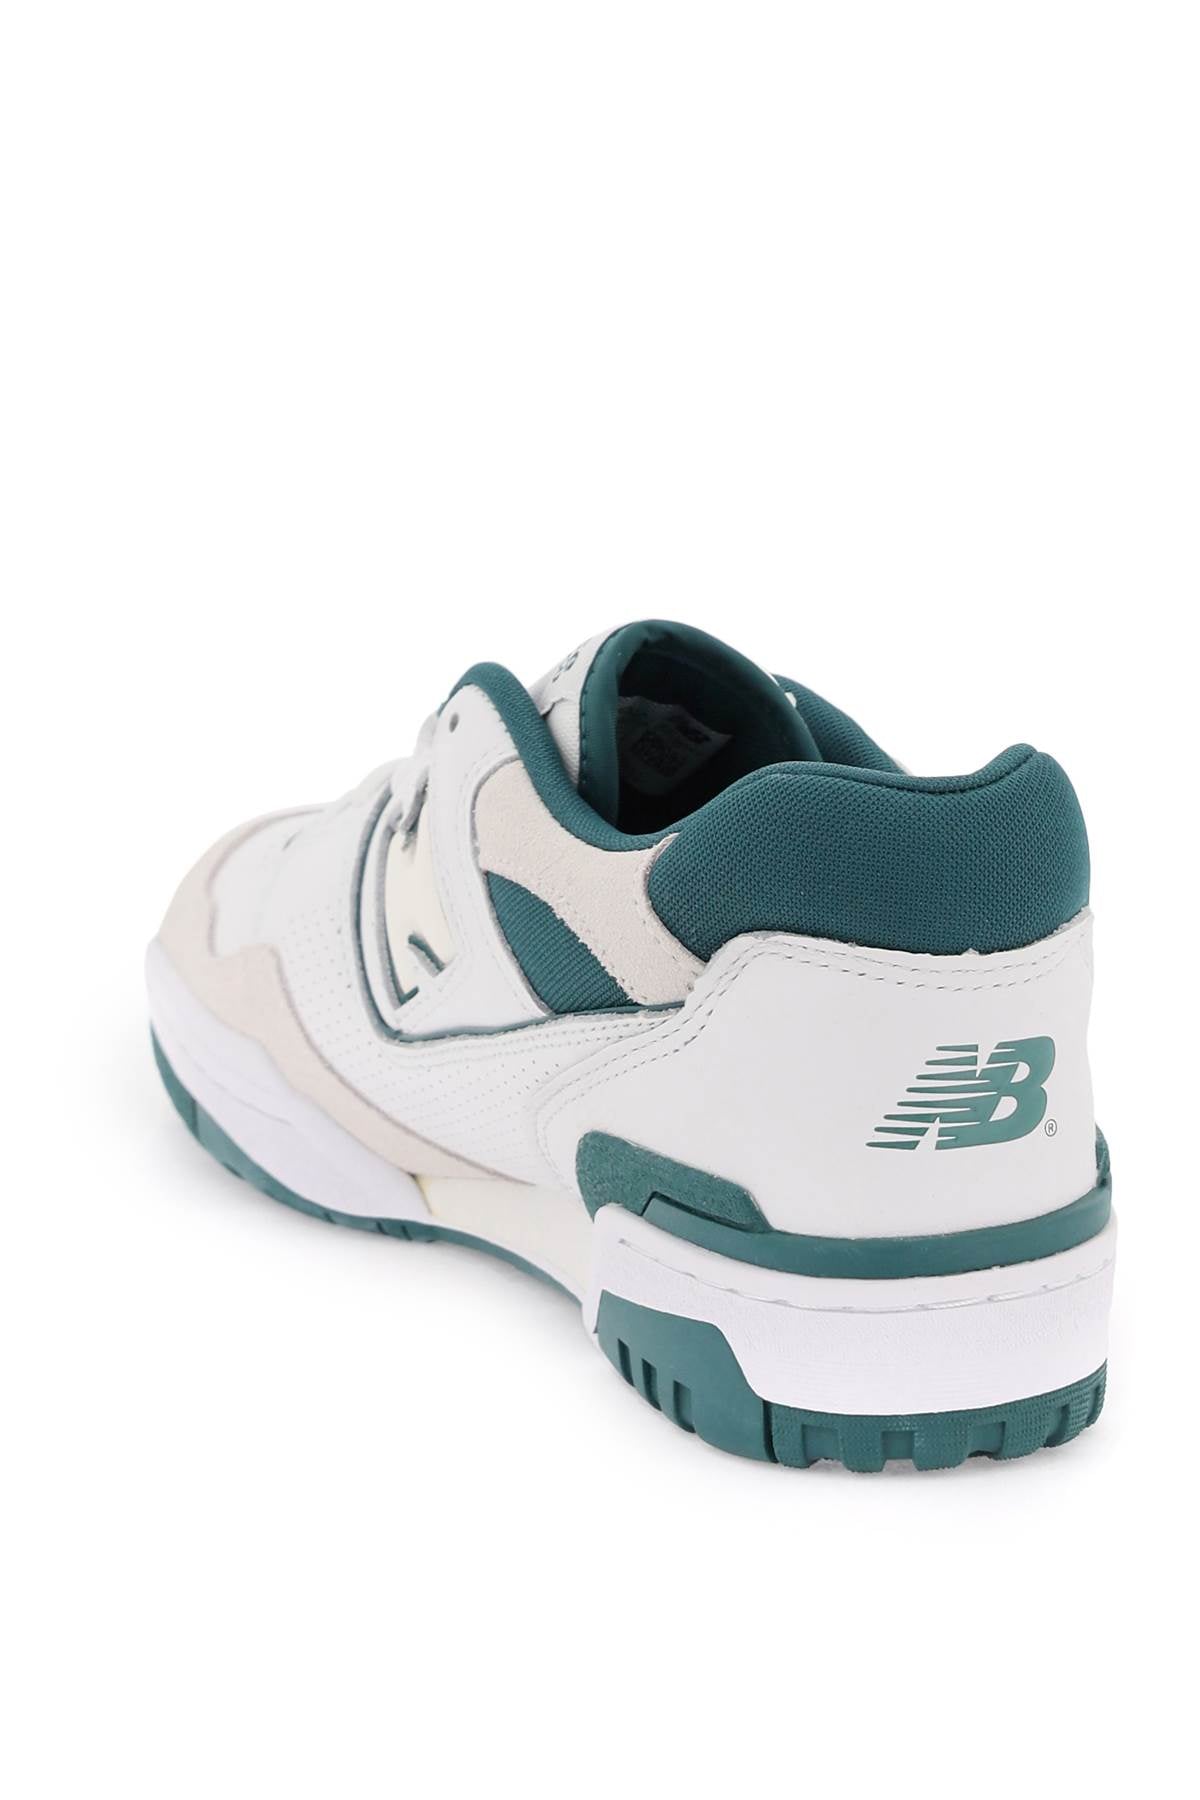 Shop New Balance 550 Sneakers In White, Green